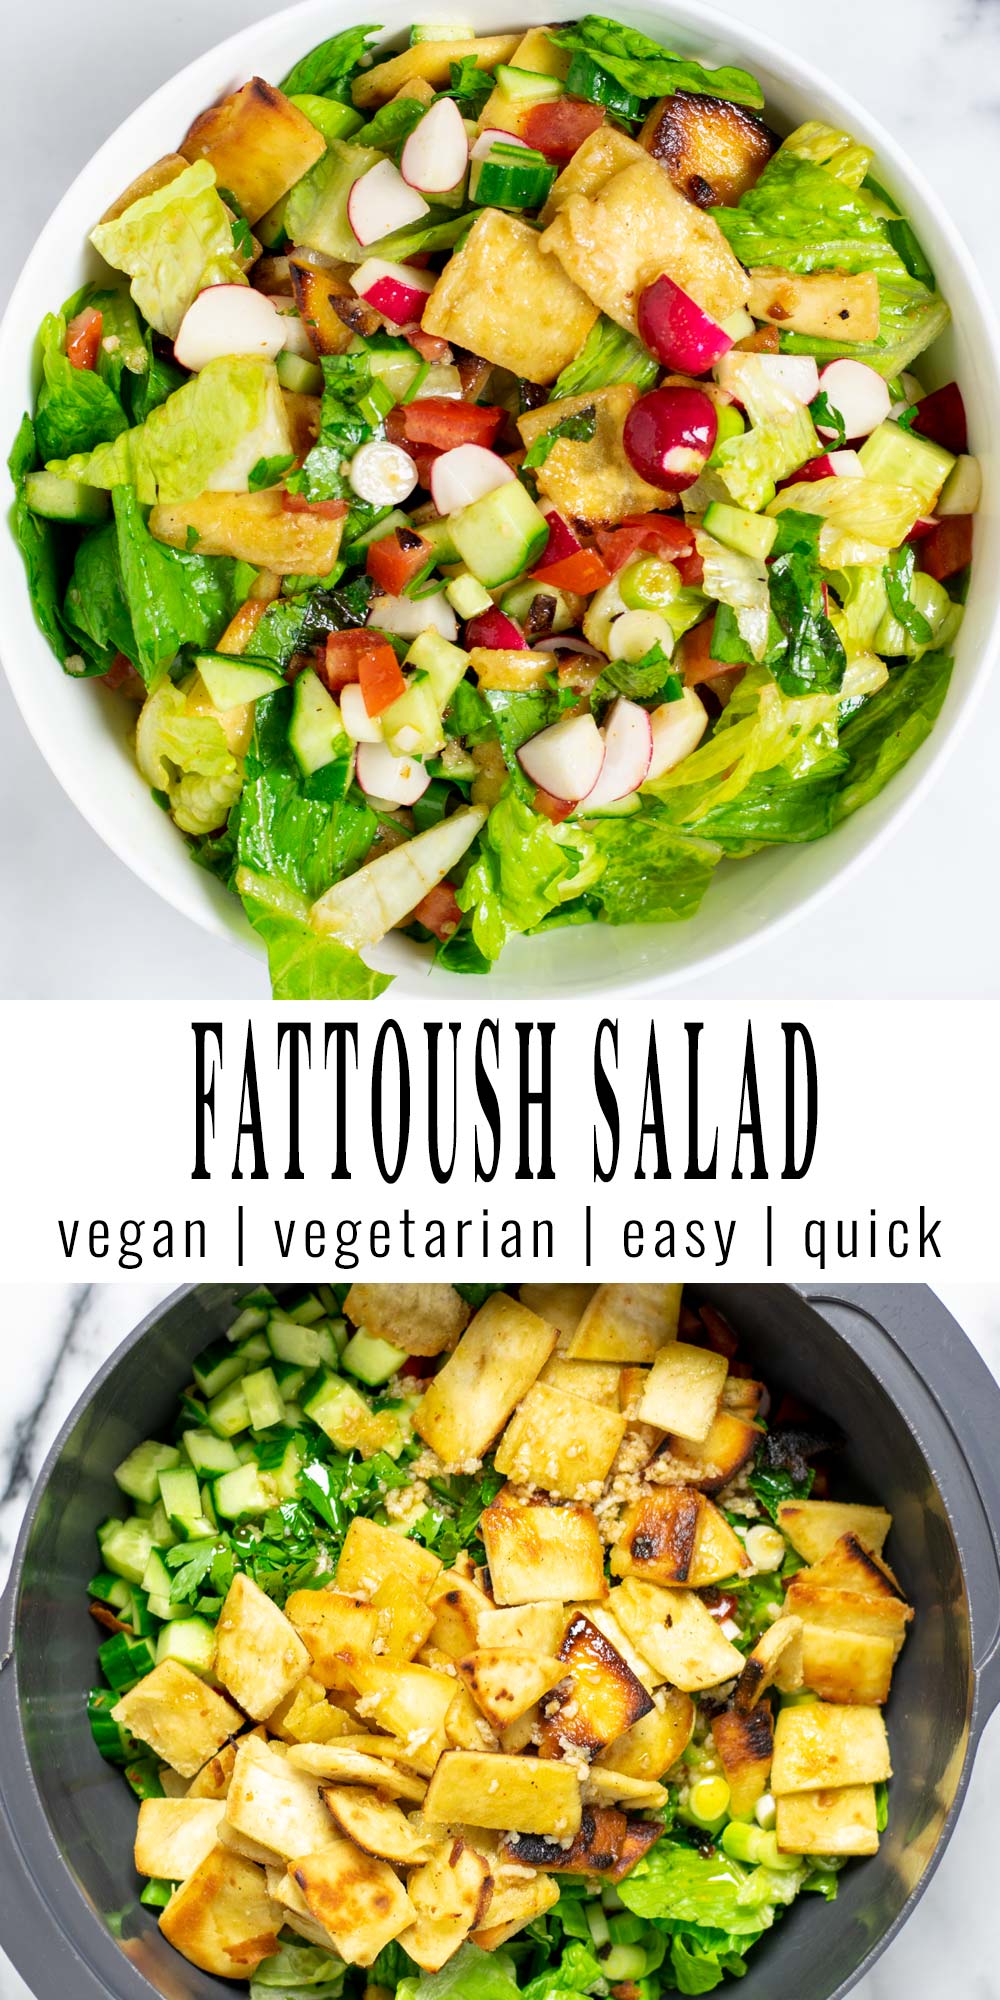 Collage of two pictures of the Fattoush Salad with recipe title text.